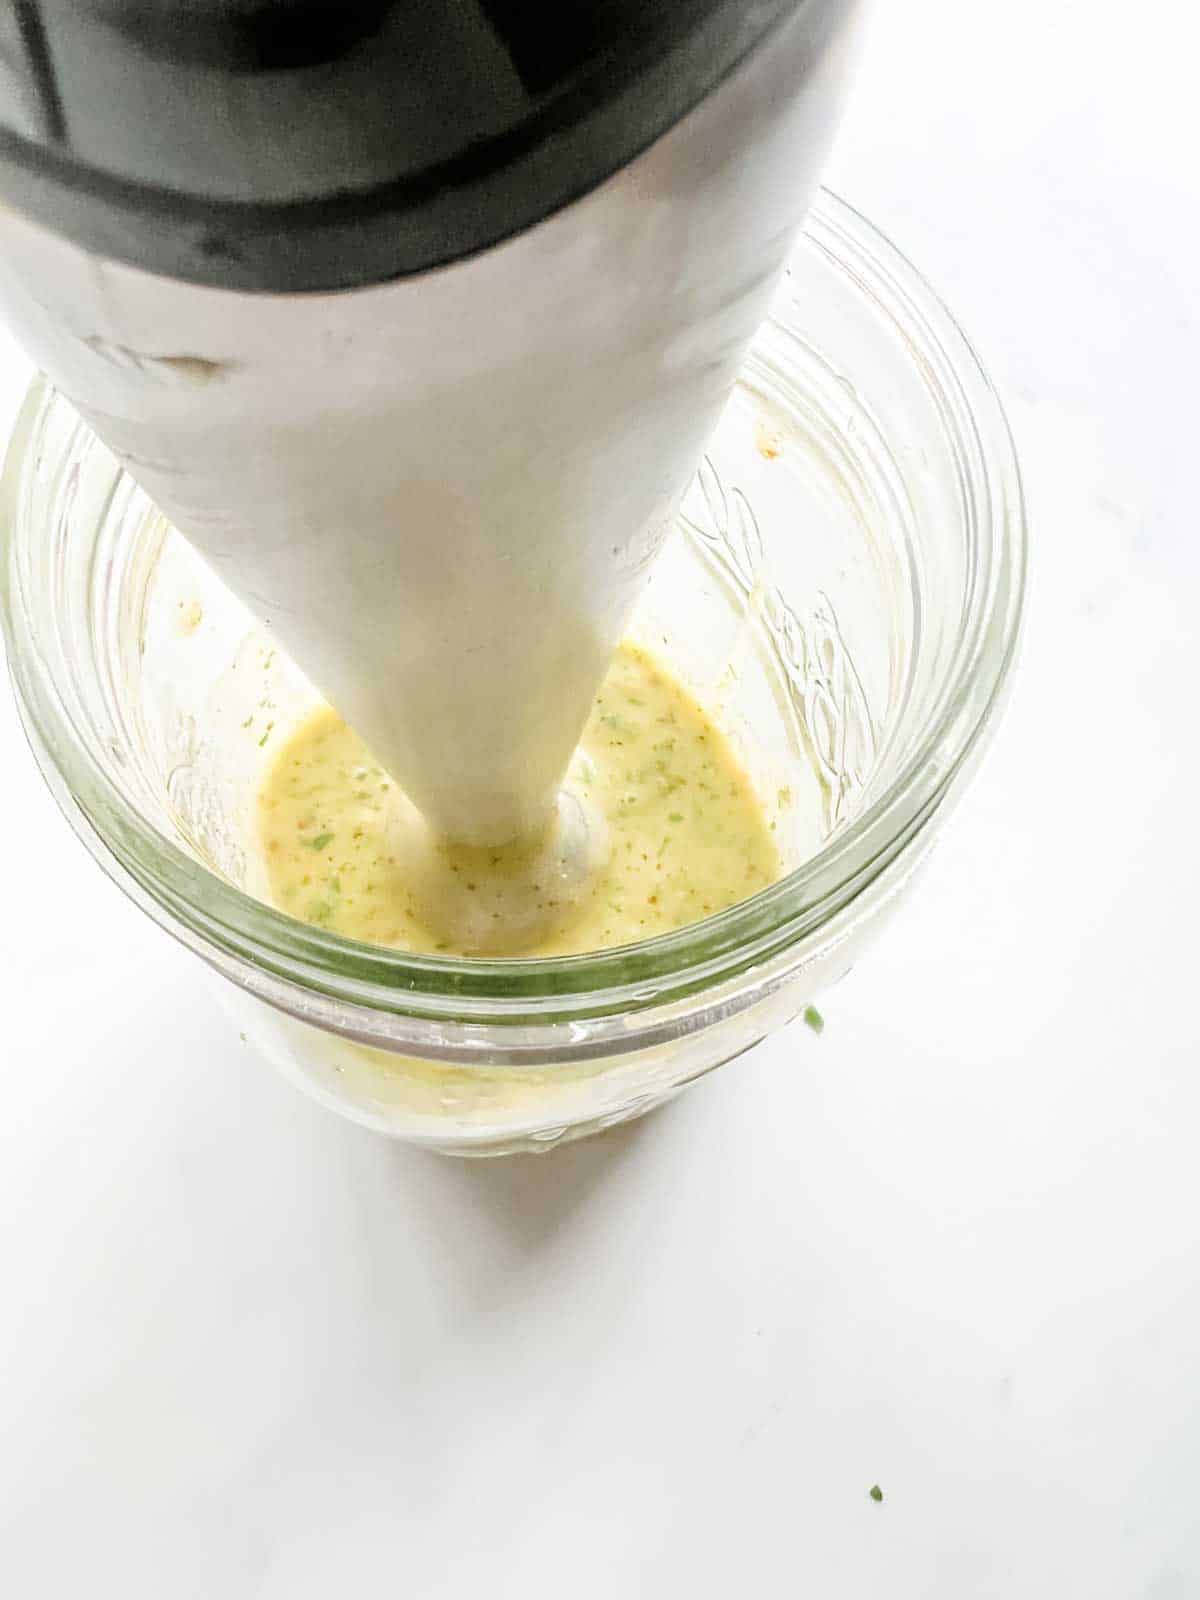 Salad dressing being blended with an immersion blender.